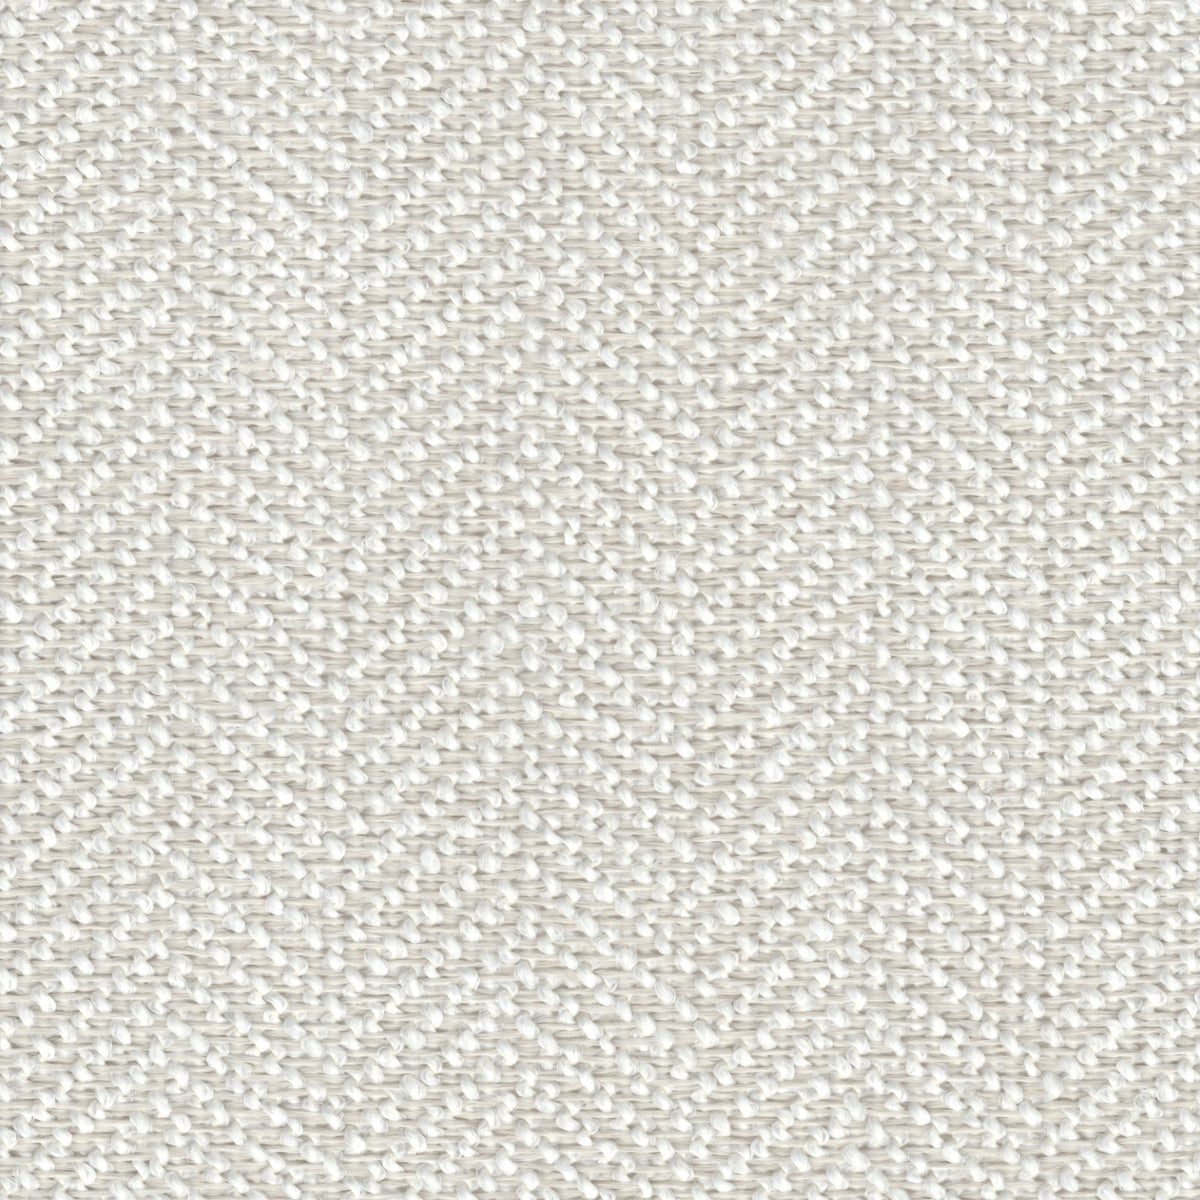 Many Sunbrella Outdoor Boucle Twist Beige Upholstery Fabric By the yard  Sunbrella X Options Available